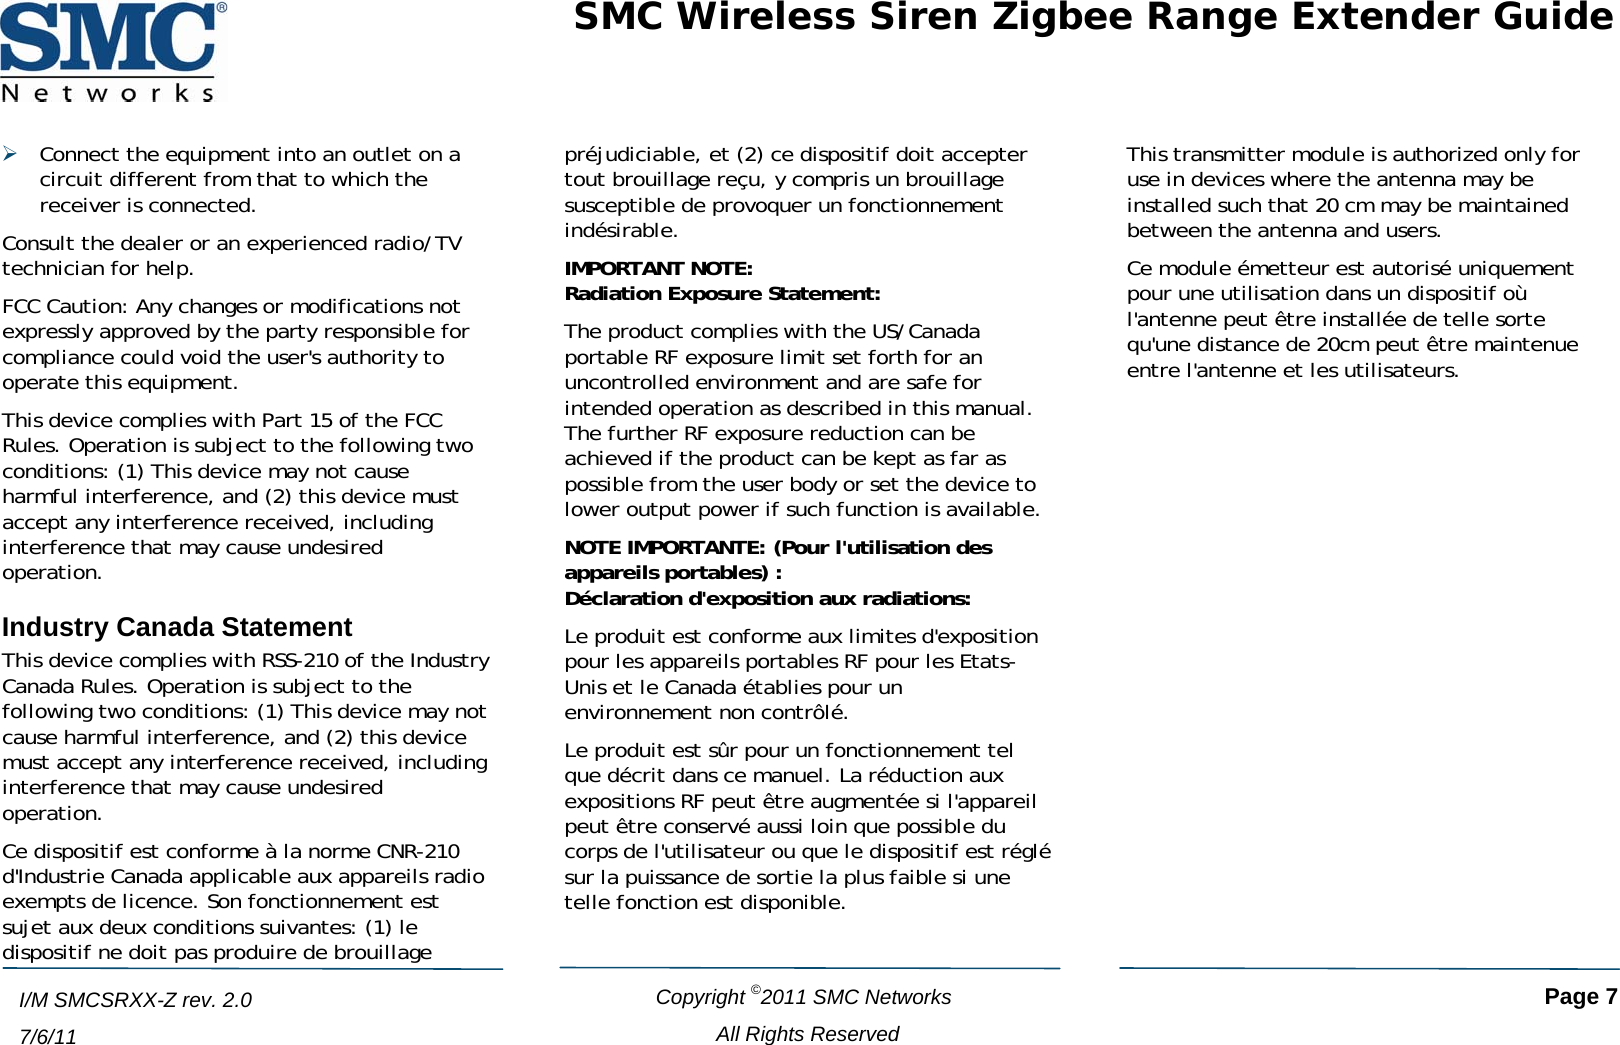 SMC Wireless Siren Zigbee Range Extender Guide   Copyright ©2011 SMC Networks   Page 7 All Rights Reserved  I/M SMCSRXX-Z rev. 2.0 7/6/11 ¾ Connect the equipment into an outlet on a circuit different from that to which the receiver is connected. Consult the dealer or an experienced radio/TV technician for help. FCC Caution: Any changes or modifications not expressly approved by the party responsible for compliance could void the user&apos;s authority to operate this equipment. This device complies with Part 15 of the FCC Rules. Operation is subject to the following two conditions: (1) This device may not cause harmful interference, and (2) this device must accept any interference received, including interference that may cause undesired operation. Industry Canada Statement This device complies with RSS-210 of the Industry Canada Rules. Operation is subject to the following two conditions: (1) This device may not cause harmful interference, and (2) this device must accept any interference received, including interference that may cause undesired operation. Ce dispositif est conforme à la norme CNR-210 d&apos;Industrie Canada applicable aux appareils radio exempts de licence. Son fonctionnement est sujet aux deux conditions suivantes: (1) le dispositif ne doit pas produire de brouillage préjudiciable, et (2) ce dispositif doit accepter tout brouillage reçu, y compris un brouillage susceptible de provoquer un fonctionnement indésirable. IMPORTANT NOTE: Radiation Exposure Statement: The product complies with the US/Canada portable RF exposure limit set forth for an uncontrolled environment and are safe for intended operation as described in this manual. The further RF exposure reduction can be achieved if the product can be kept as far as possible from the user body or set the device to lower output power if such function is available. NOTE IMPORTANTE: (Pour l&apos;utilisation des appareils portables) : Déclaration d&apos;exposition aux radiations: Le produit est conforme aux limites d&apos;exposition pour les appareils portables RF pour les Etats-Unis et le Canada établies pour un environnement non contrôlé. Le produit est sûr pour un fonctionnement tel que décrit dans ce manuel. La réduction aux expositions RF peut être augmentée si l&apos;appareil peut être conservé aussi loin que possible du corps de l&apos;utilisateur ou que le dispositif est réglé sur la puissance de sortie la plus faible si une telle fonction est disponible. This transmitter module is authorized only for use in devices where the antenna may be installed such that 20 cm may be maintained between the antenna and users. Ce module émetteur est autorisé uniquement pour une utilisation dans un dispositif où l&apos;antenne peut être installée de telle sorte qu&apos;une distance de 20cm peut être maintenue entre l&apos;antenne et les utilisateurs.  